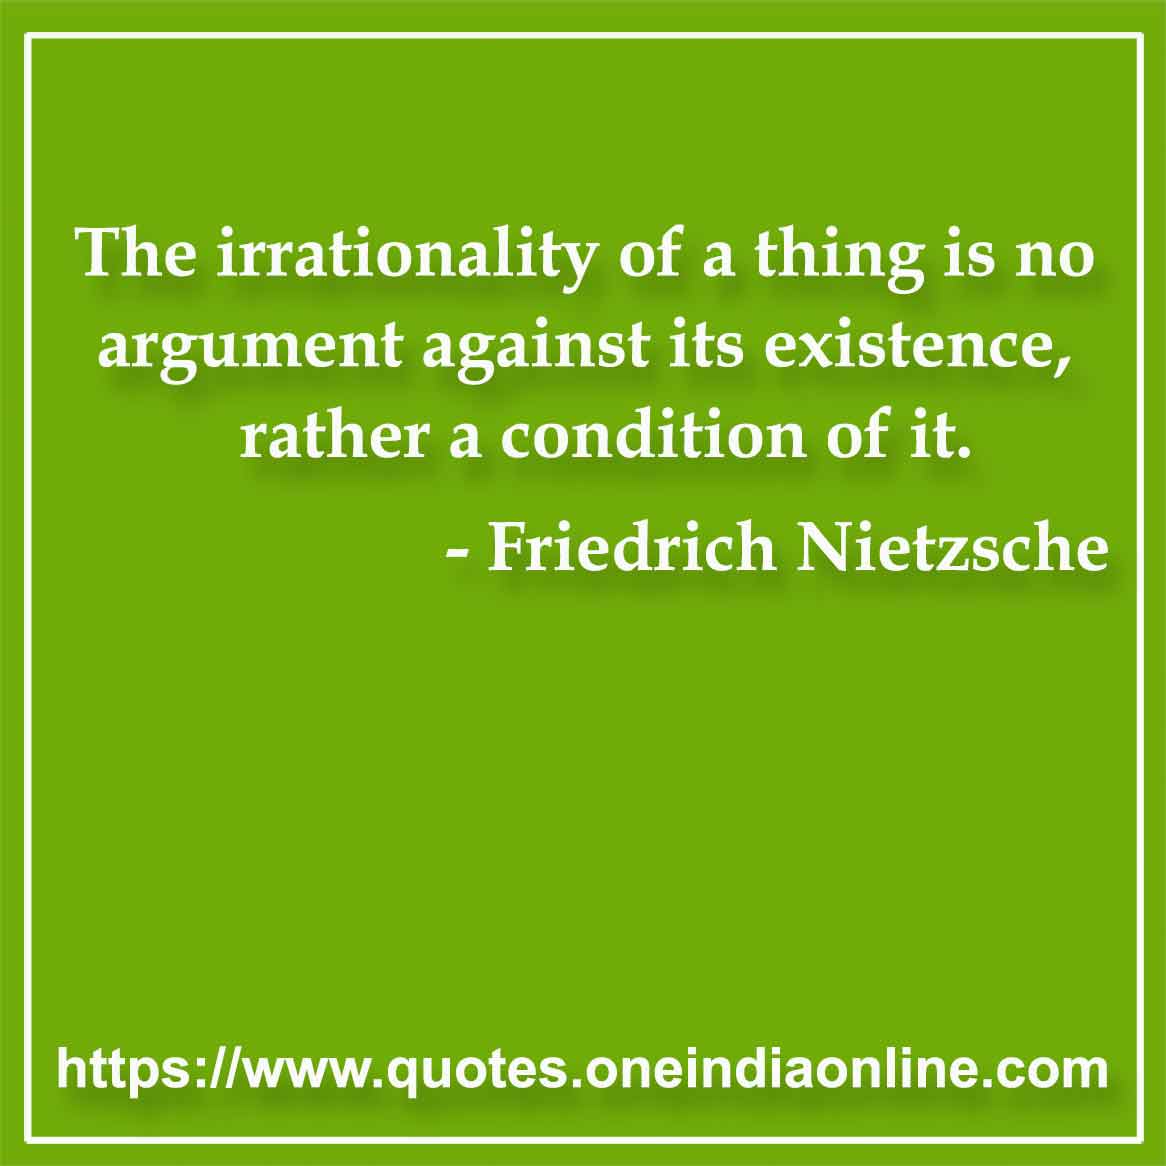 The irrationality of a thing is no argument against its existence, rather a condition of it.

- Absurdity Quote by Friedrich Nietzsche